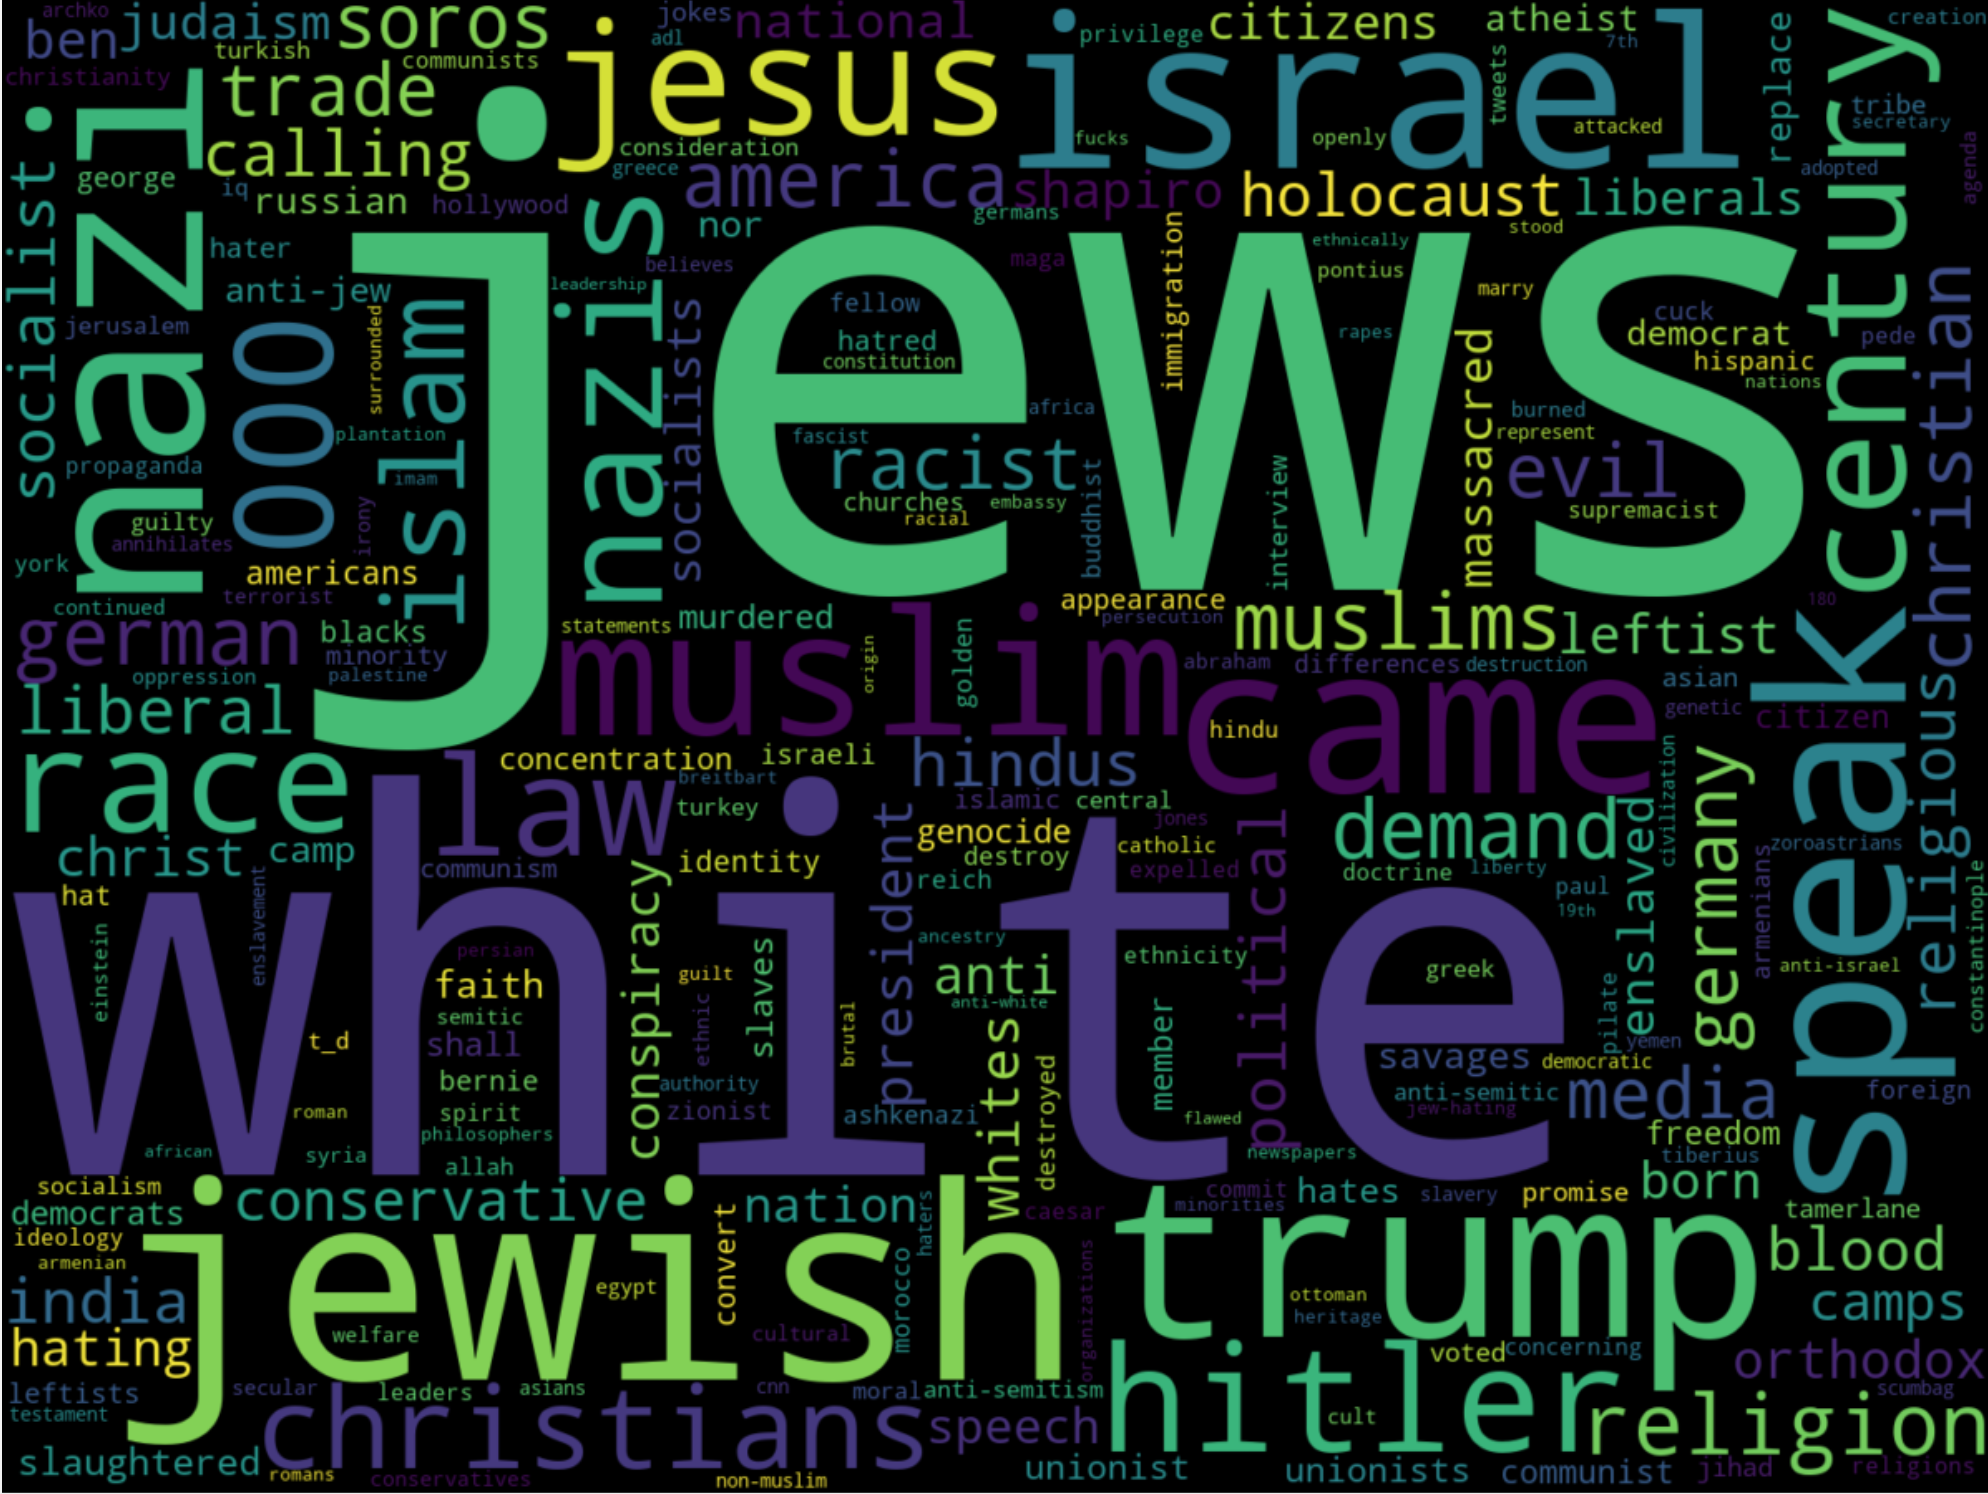 Word cloud for "jew" in The_Donald